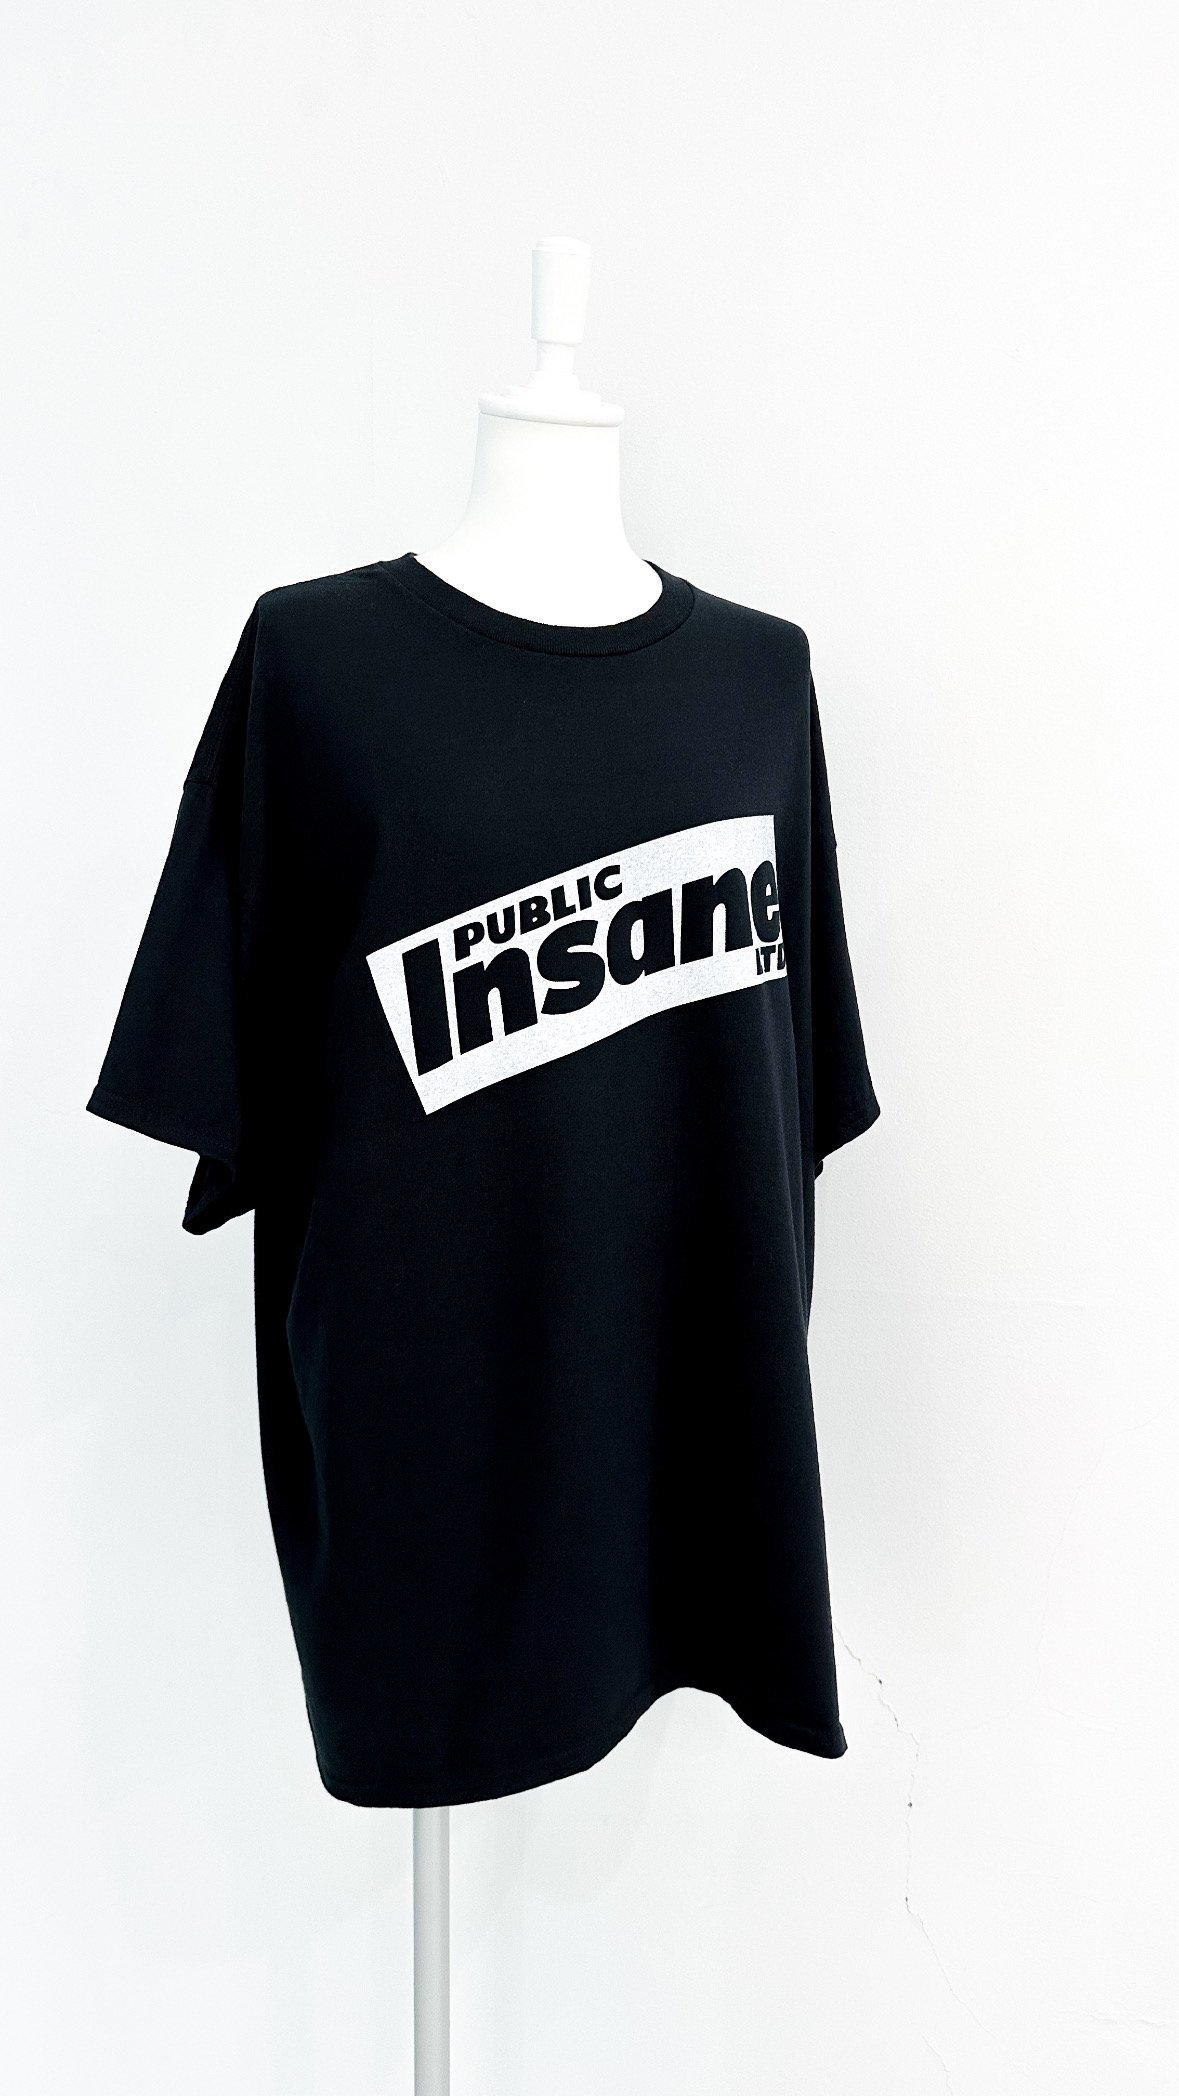 <img class='new_mark_img1' src='https://img.shop-pro.jp/img/new/icons47.gif' style='border:none;display:inline;margin:0px;padding:0px;width:auto;' />OVERSIZED PRINT T-SHIRT